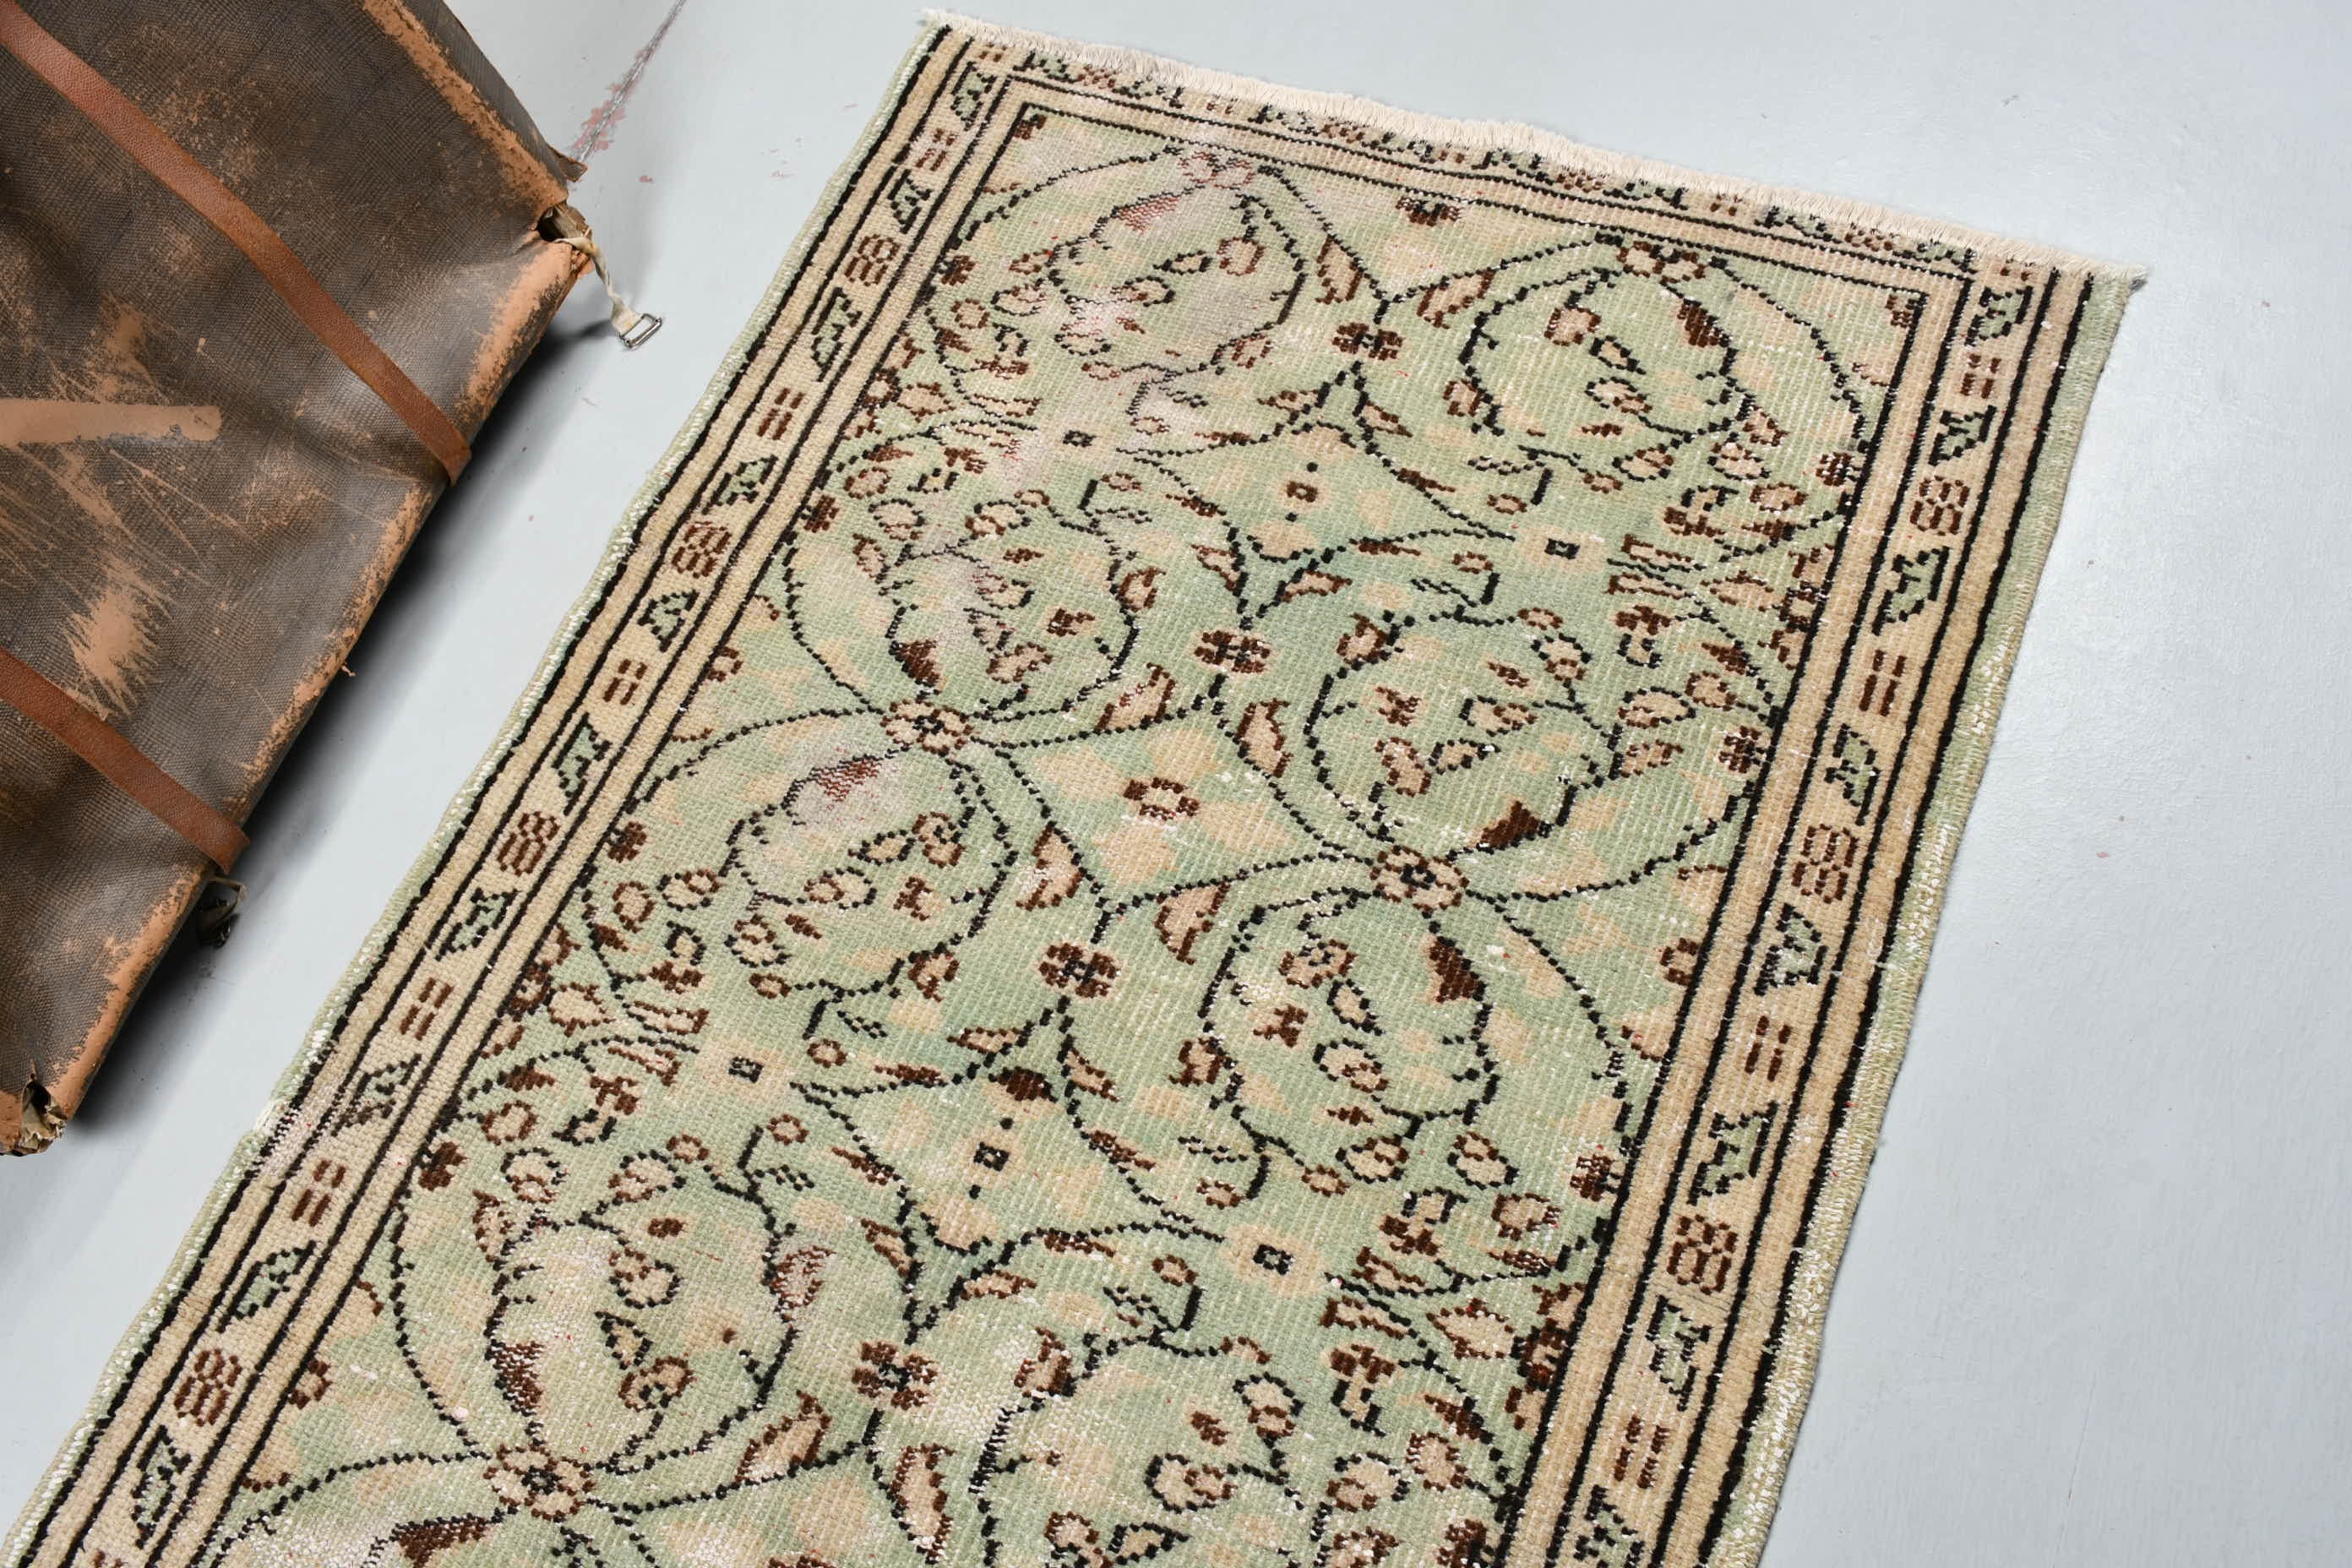 Kitchen Rugs, Vintage Rug, Bedroom Rugs, Turkish Rug, Green Antique Rug, Oushak Rugs, 2.8x6.3 ft Accent Rugs, Rugs for Entry, Nomadic Rug